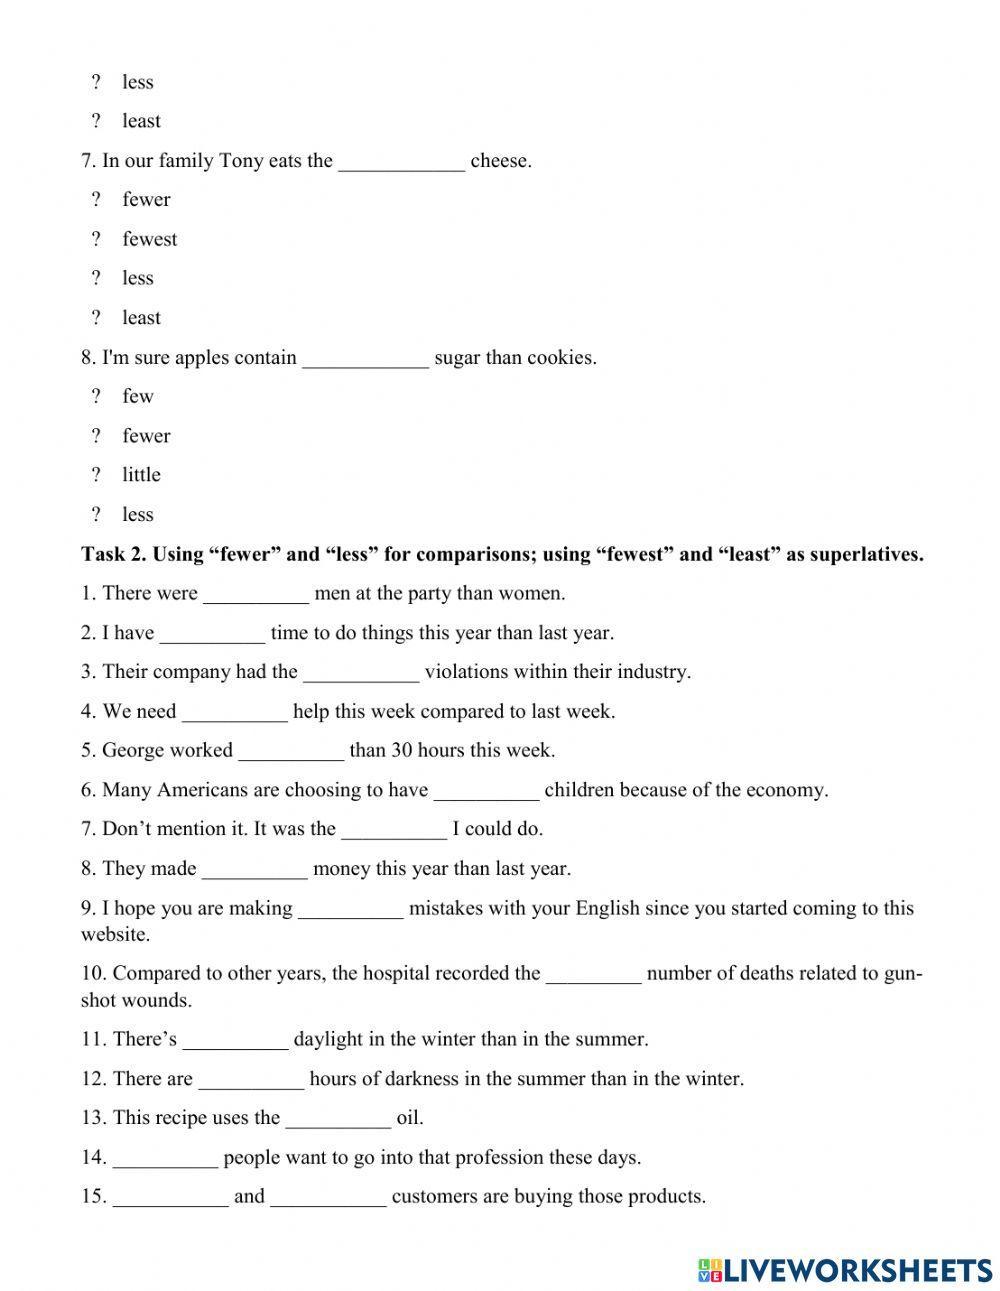 Comparatives & superlative (less-fewer-the least-the fewest) worksheet |  Live Worksheets